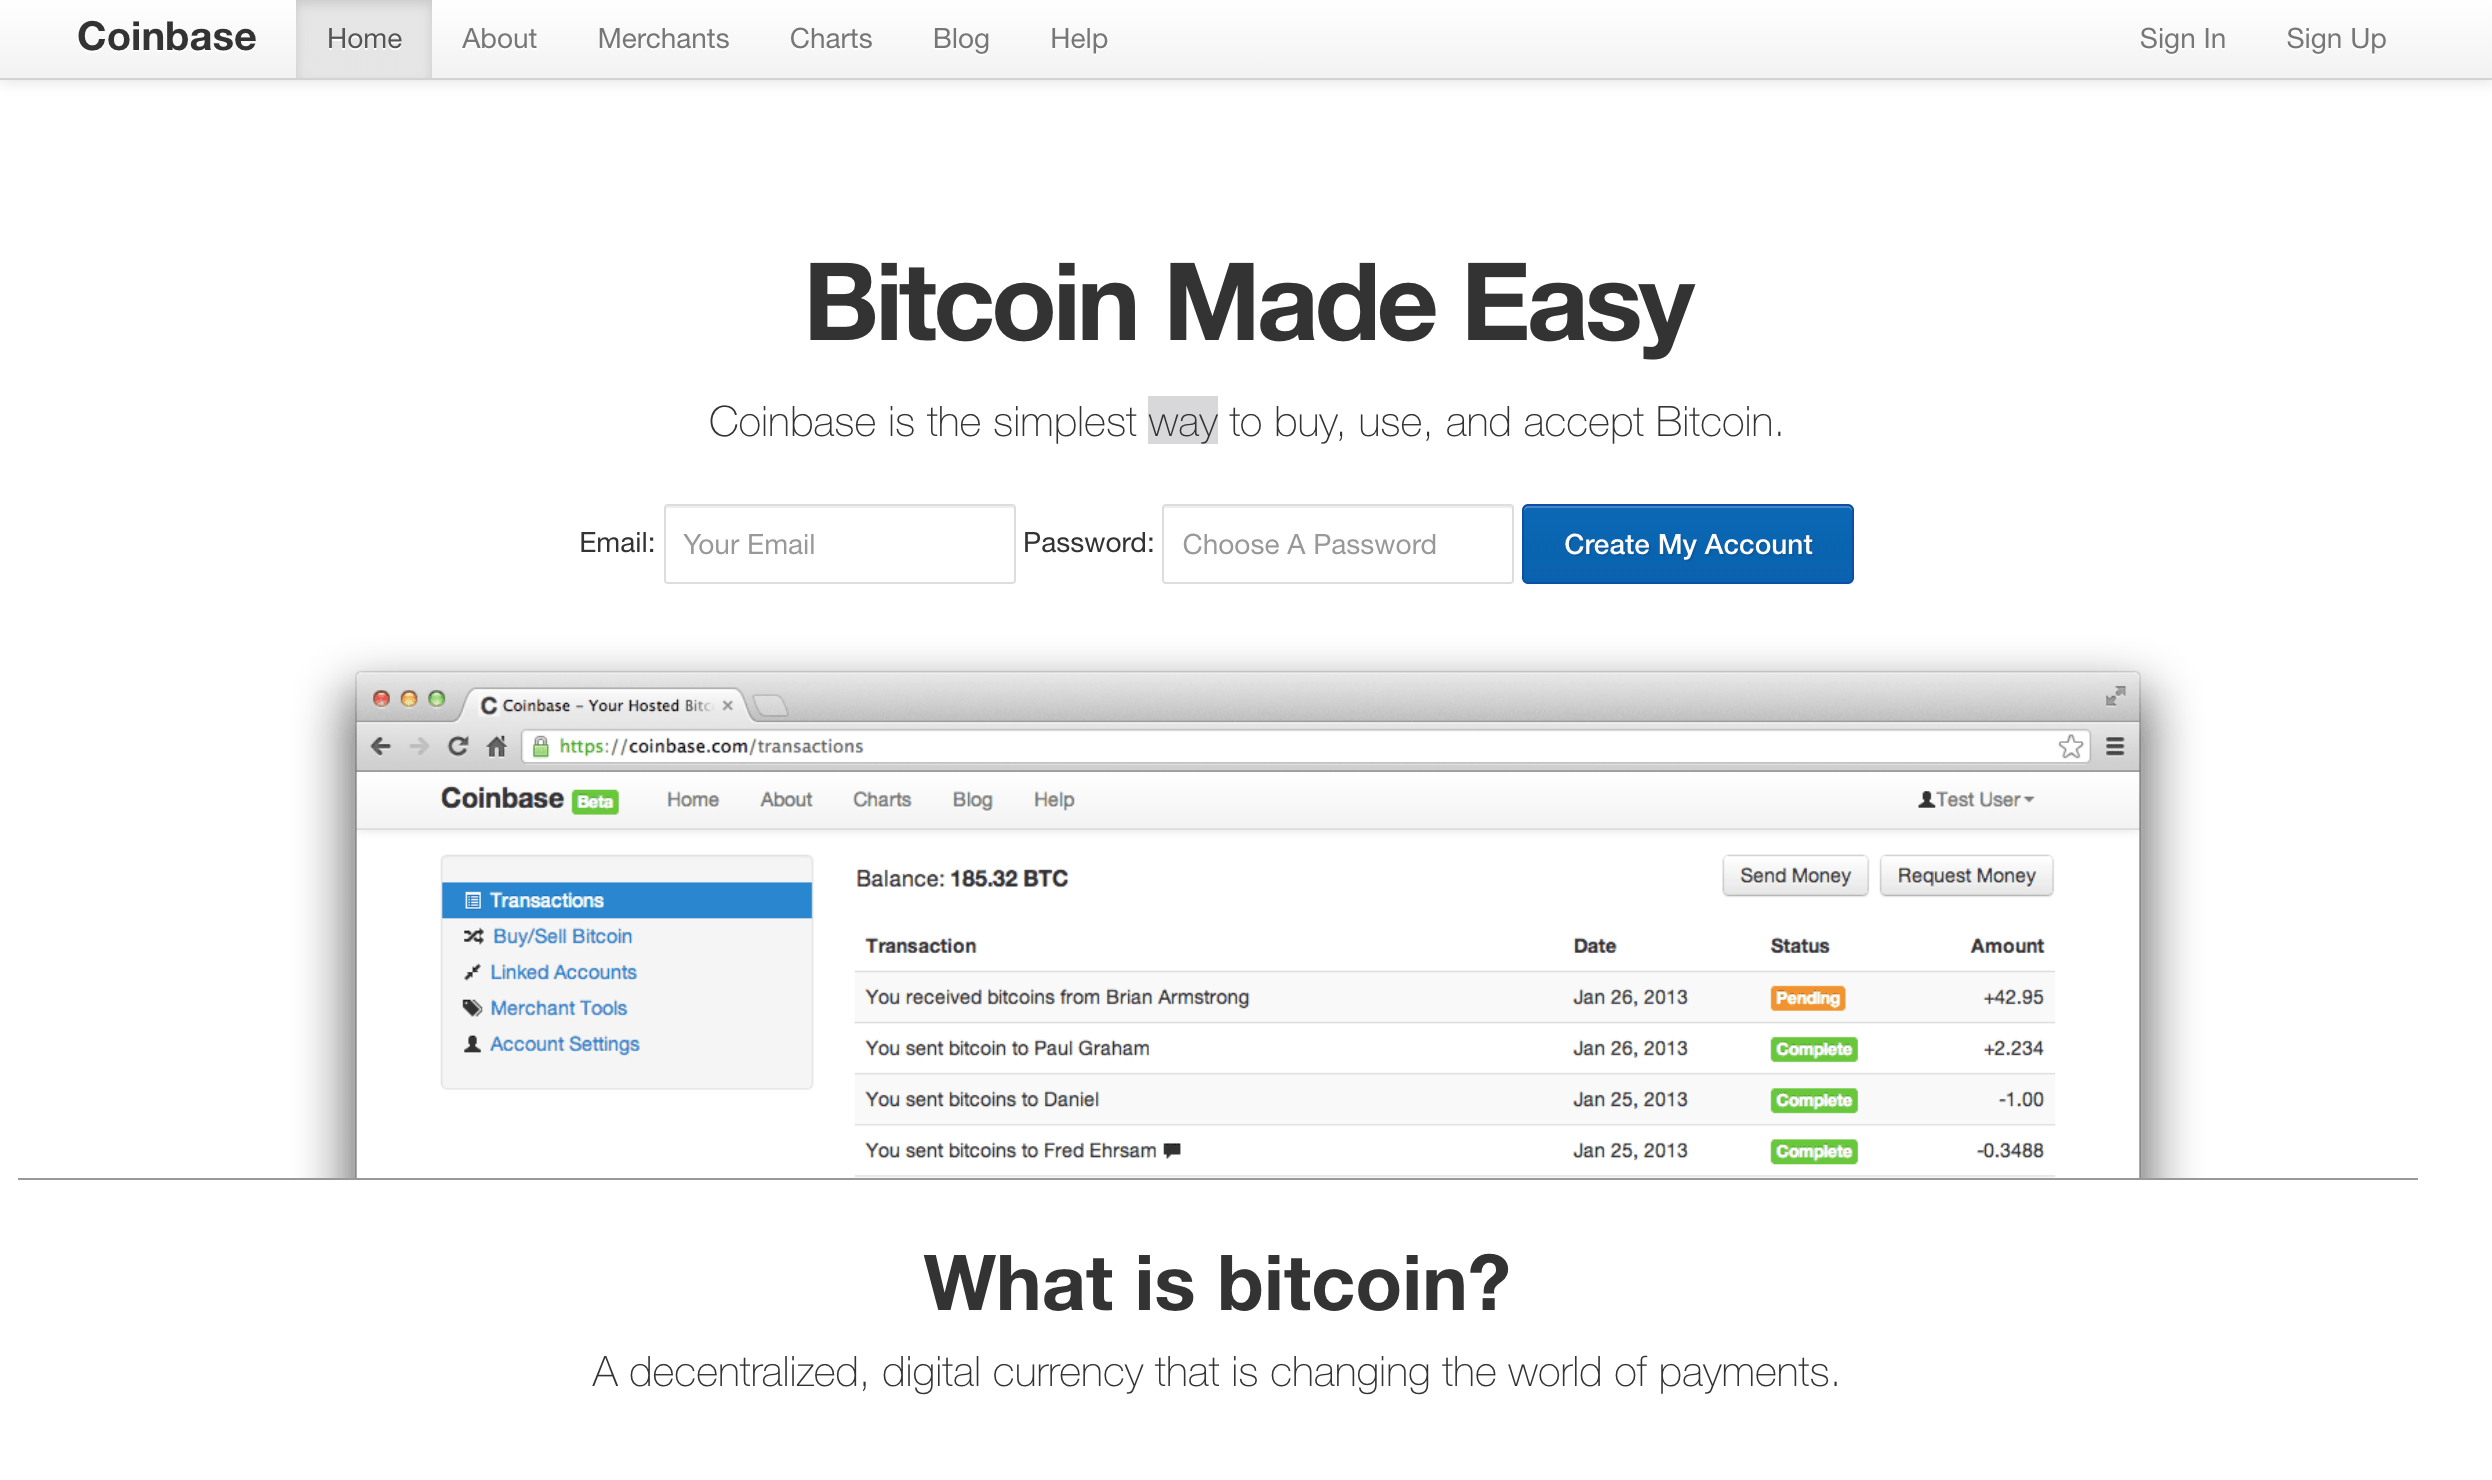 Designing Coinbase - Clarity and Trust for Bitcoin